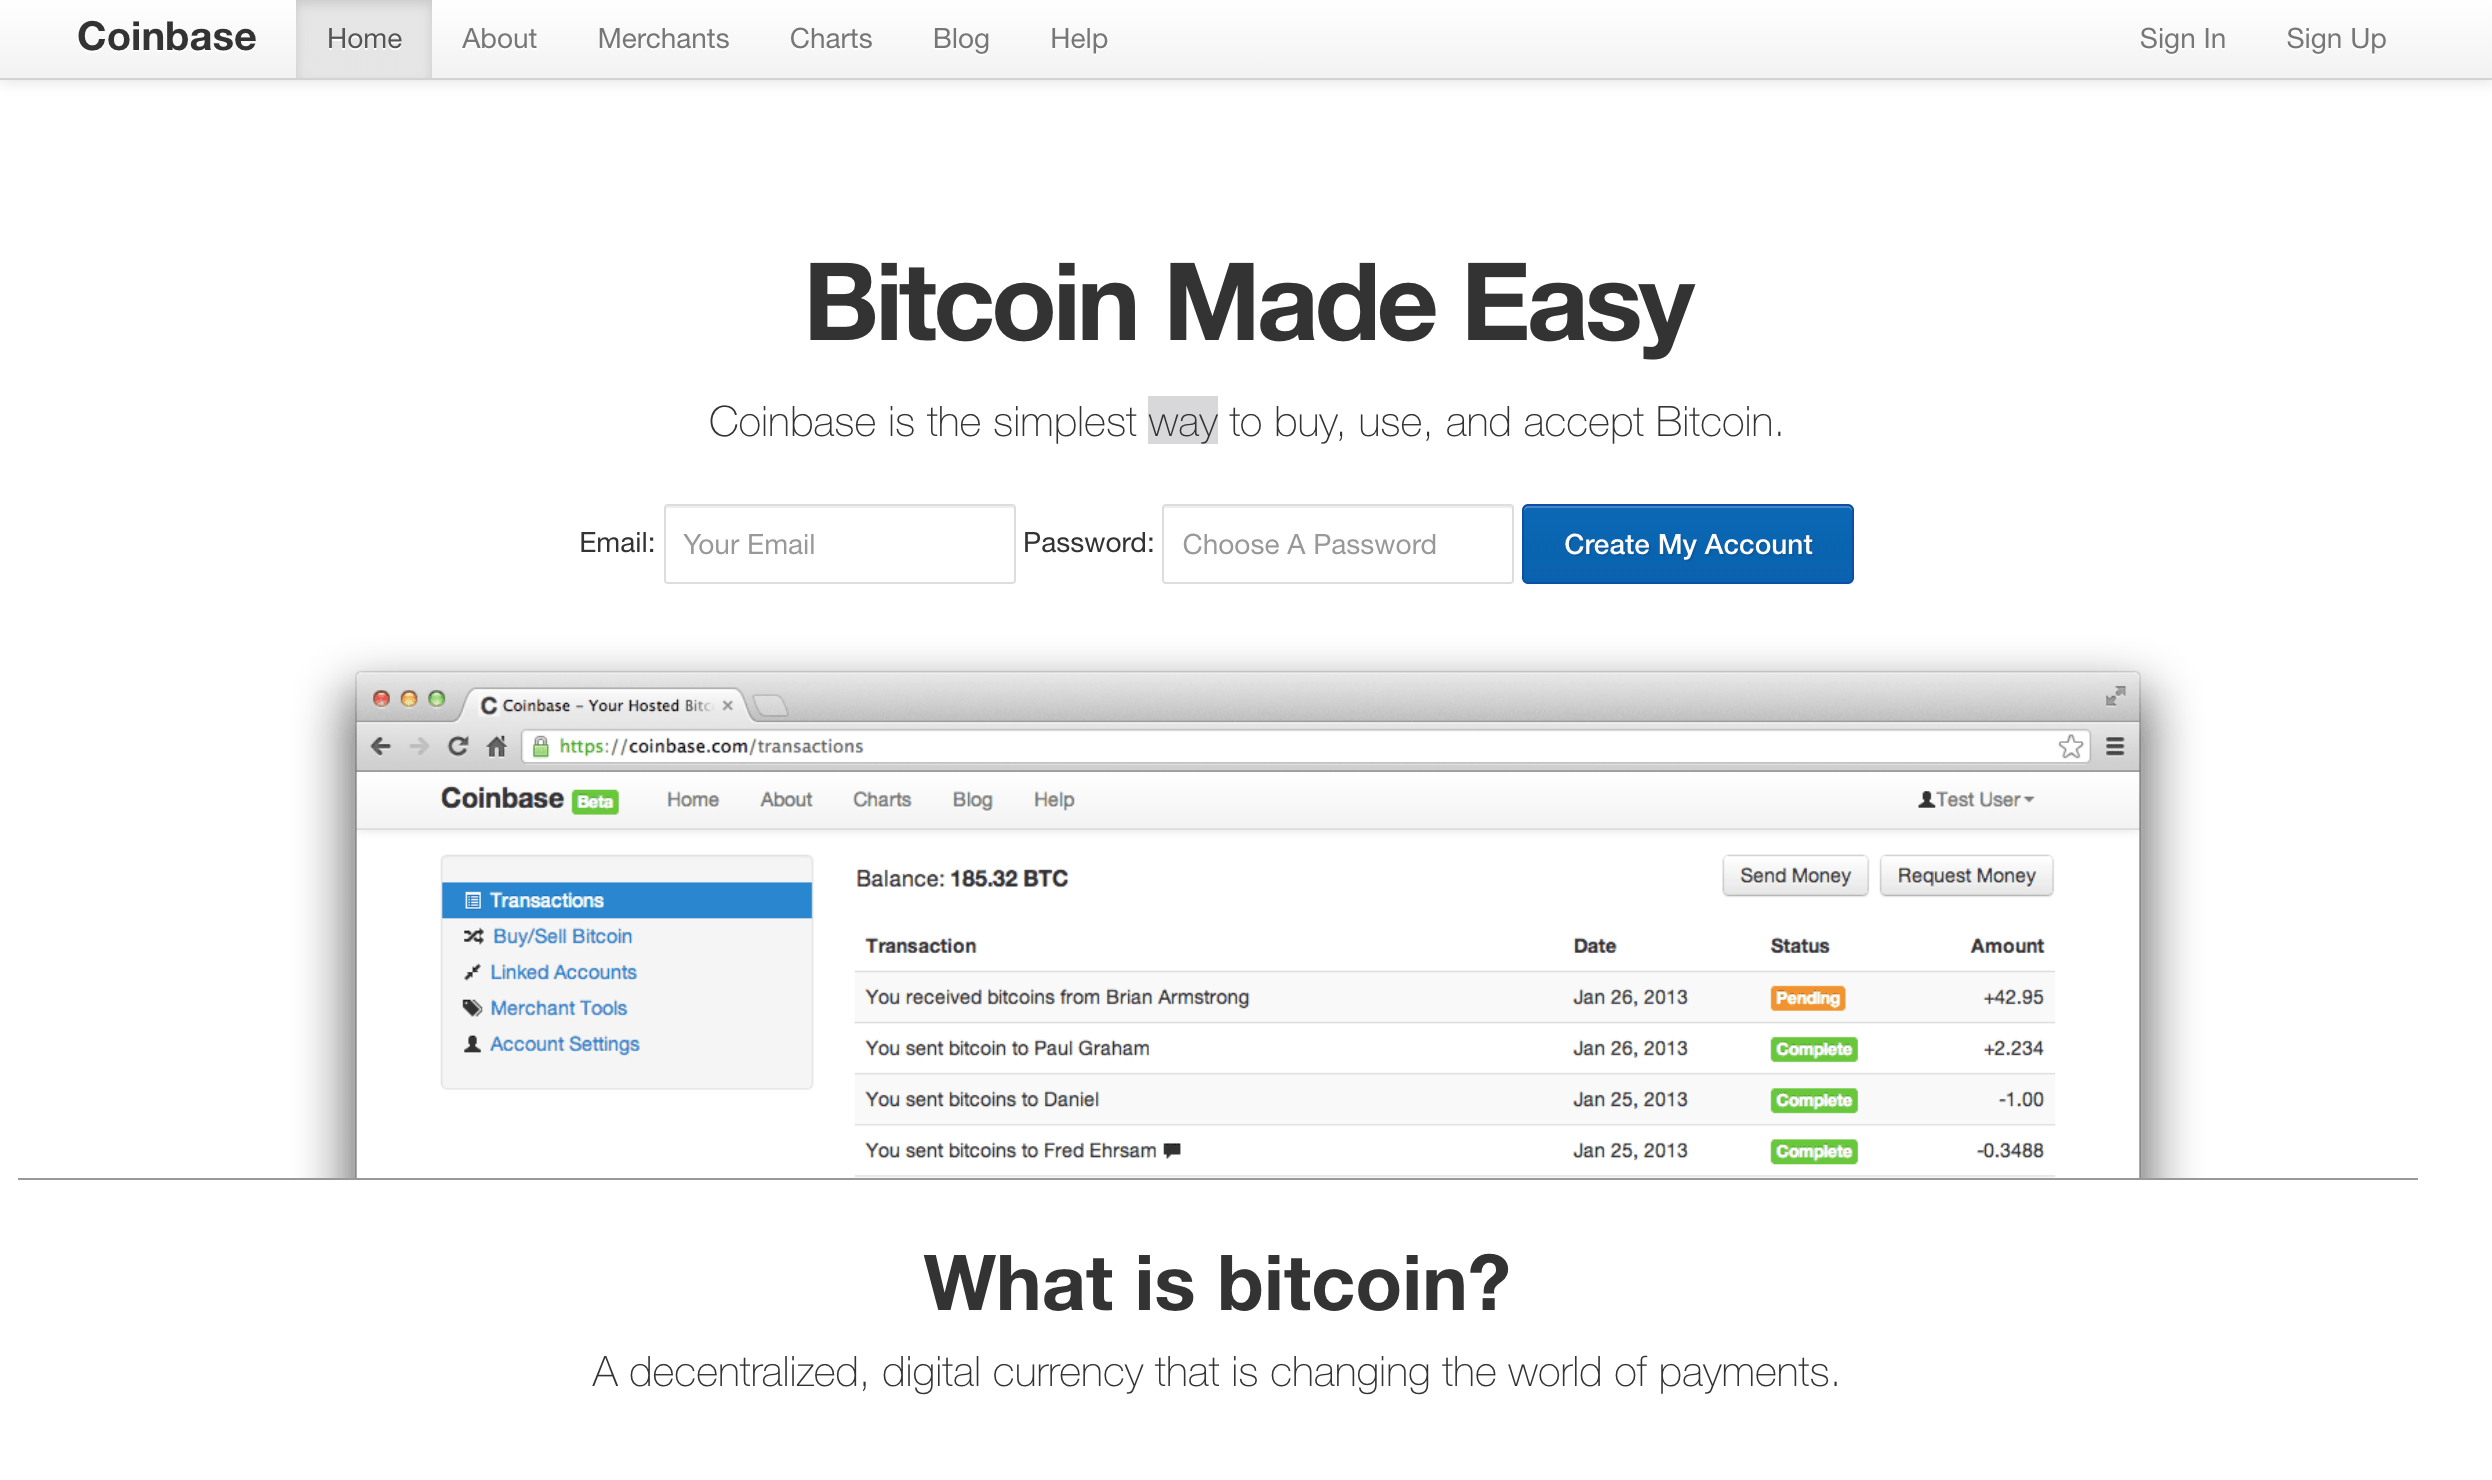 Designing Coinbase - Clarity and Trust for Bitcoin